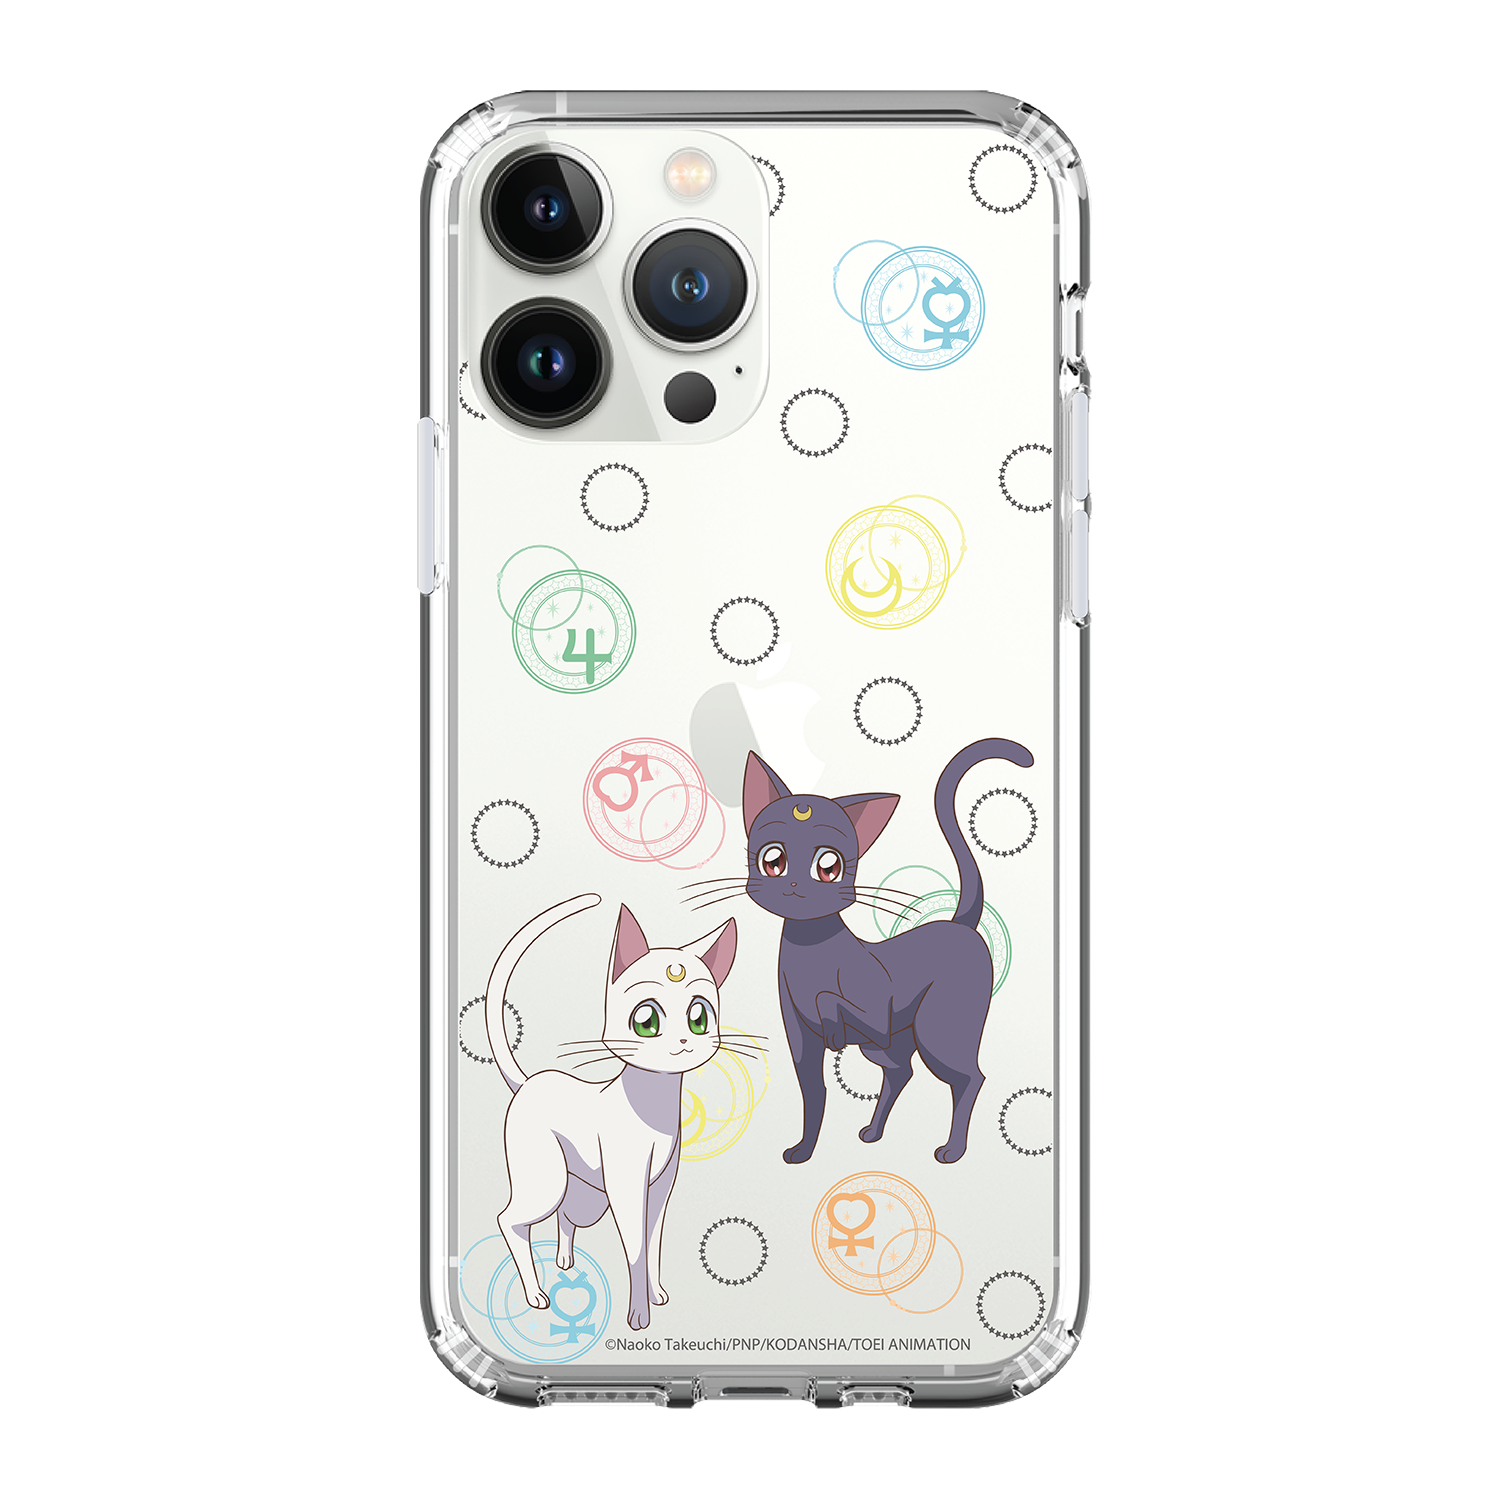 Sailor Moon Clear Case / iPhone Case / Android Case / Samsung Case 美少女戰士 正版授權 全包邊氣囊防撞手機殼 (SA100)